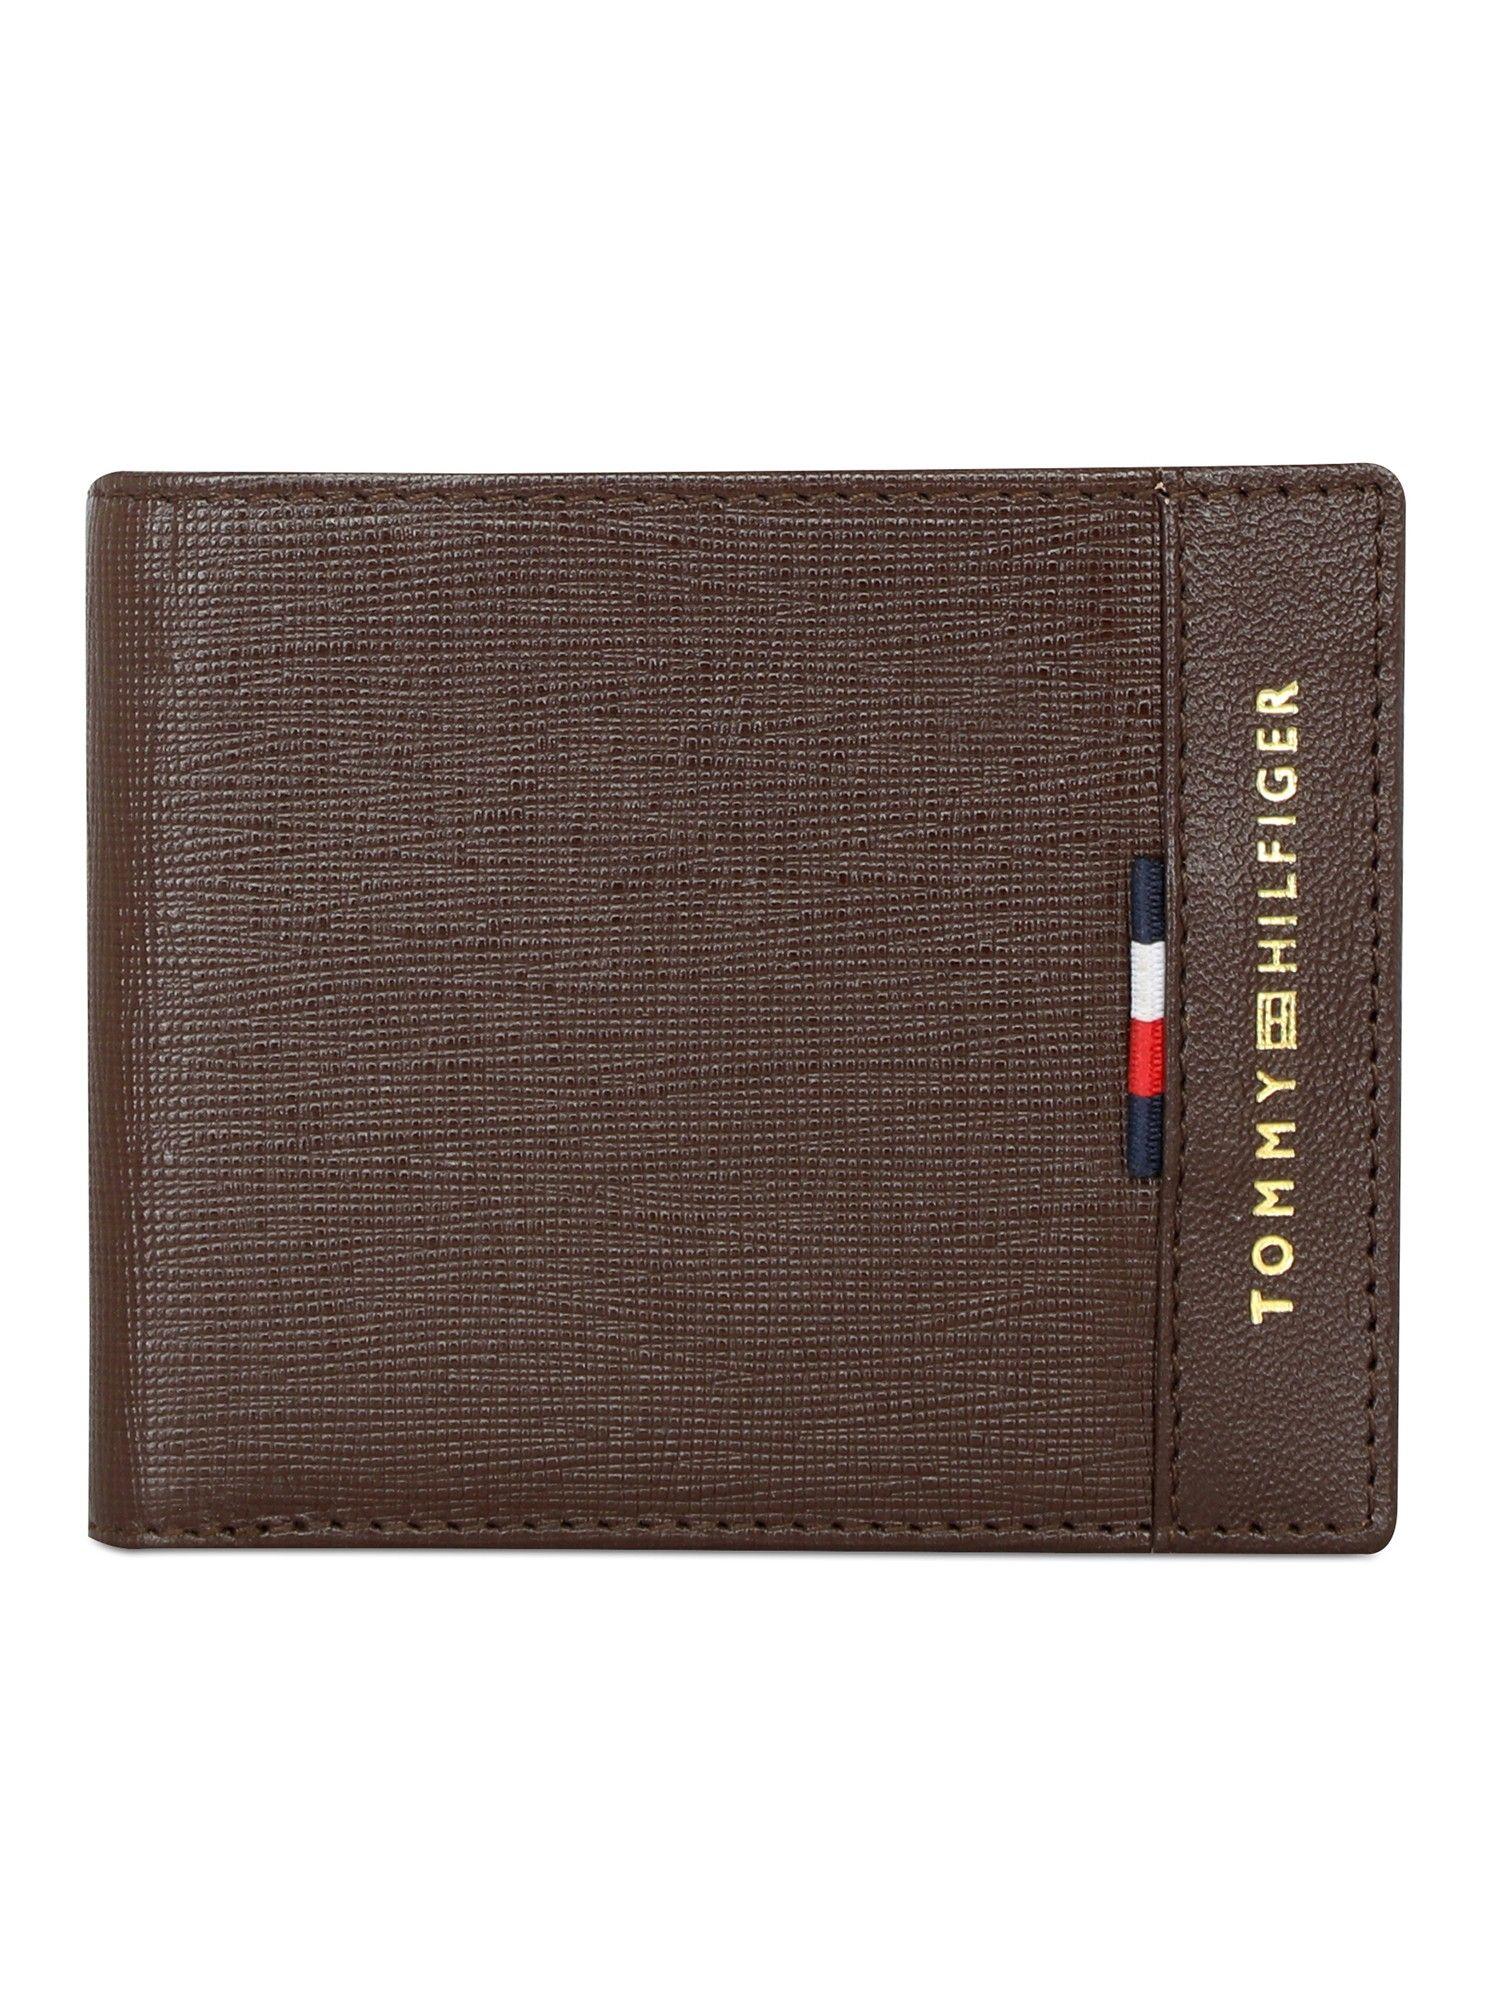 carmine mens leather global coin wallet textured brown